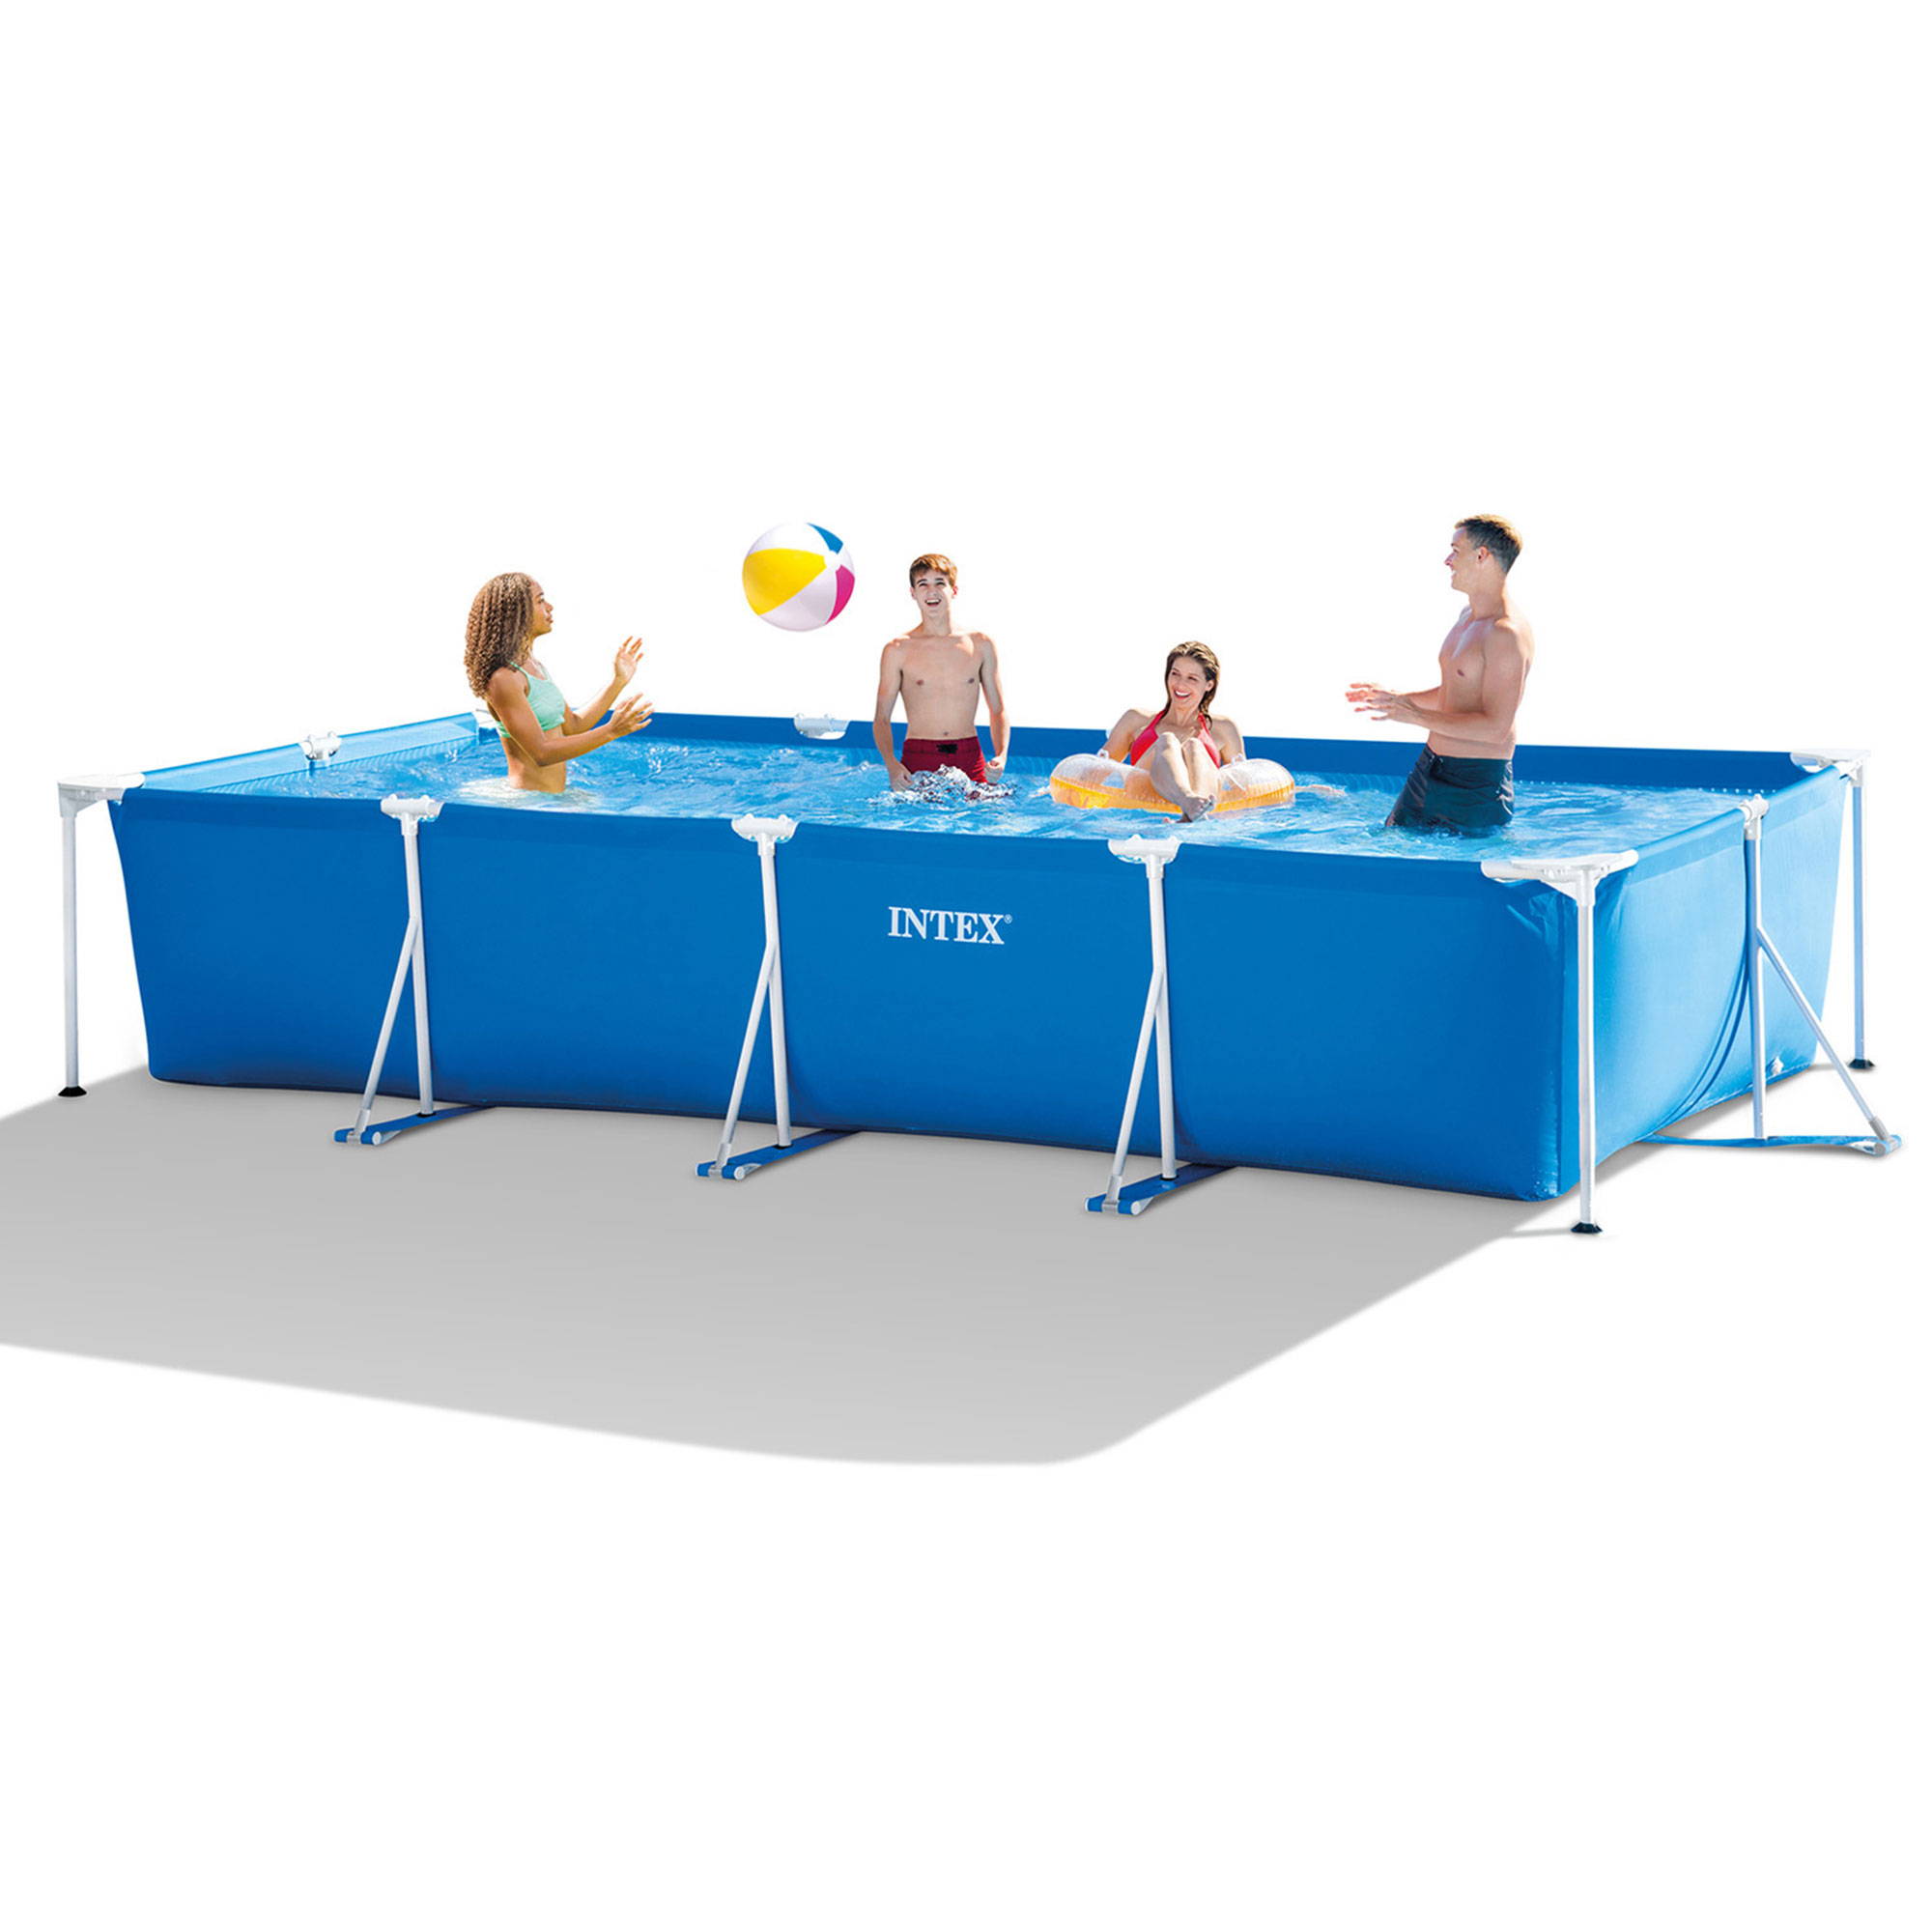 Intex 14.75' x 33" Rectangular Frame Above Ground Outdoor Swimming Pool - image 2 of 12